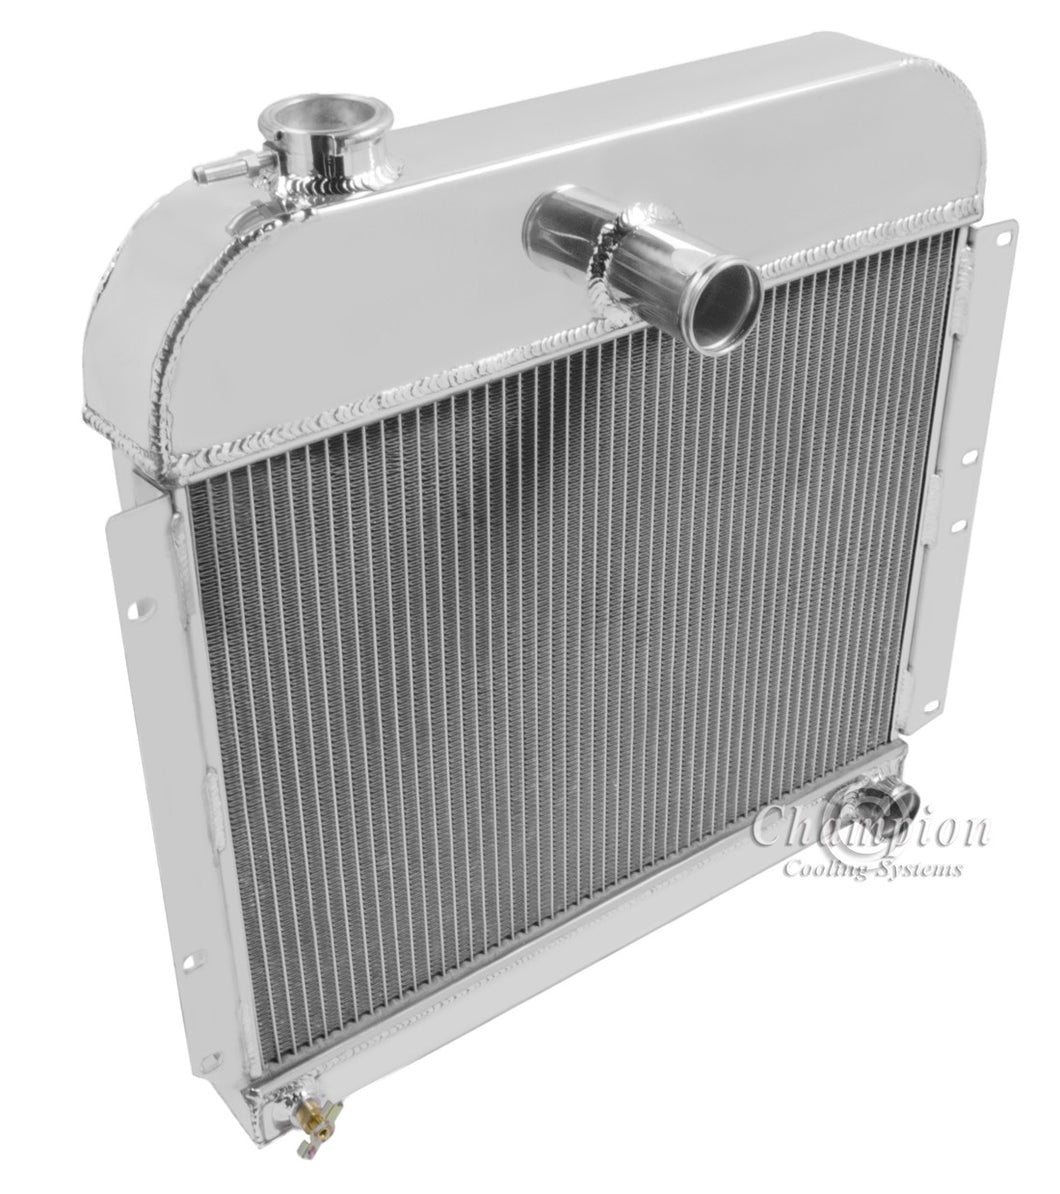 1941 PLYMOUTH P11 DELUXE 3.3 L RADIATOR CC4152